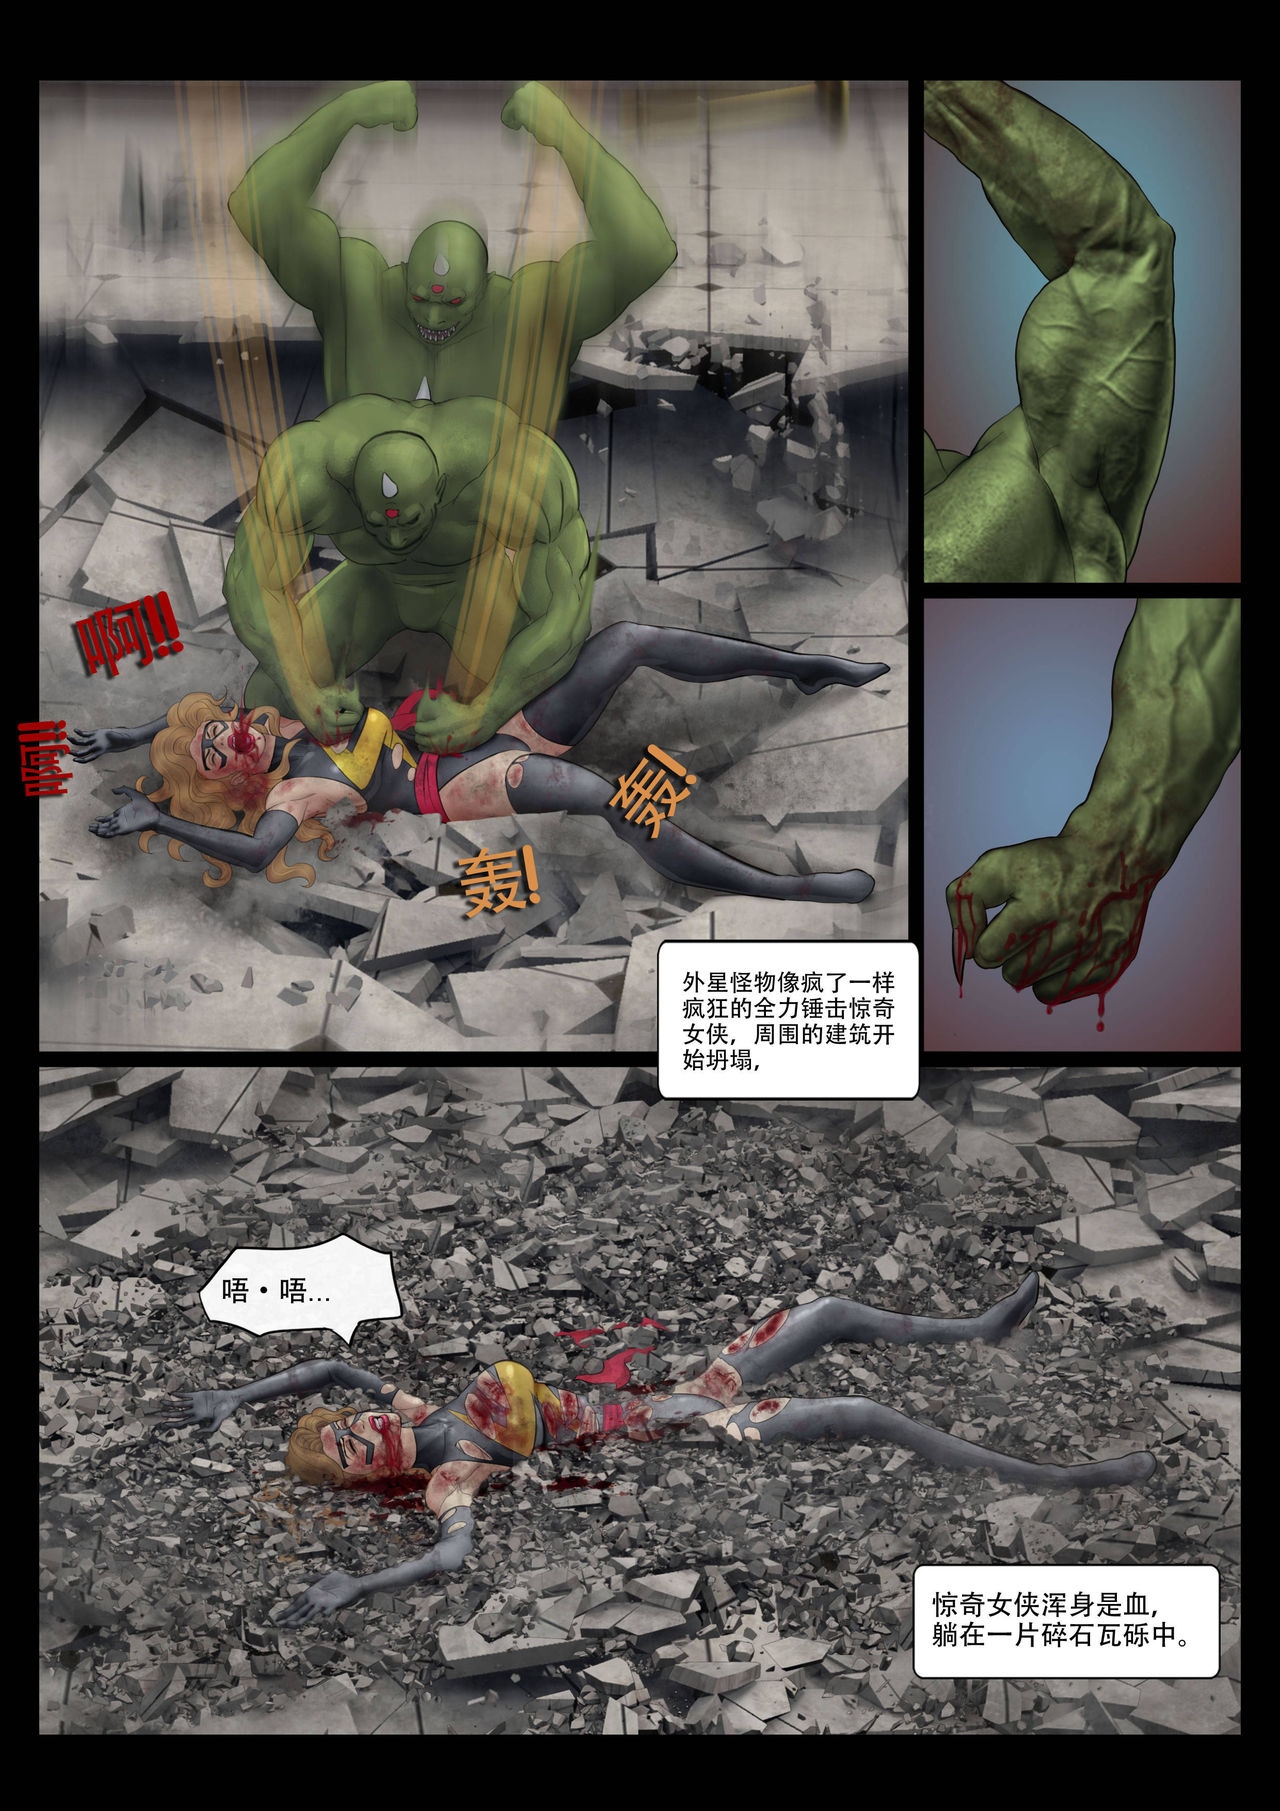 The Nightmare of Avengers Chapter 0 19